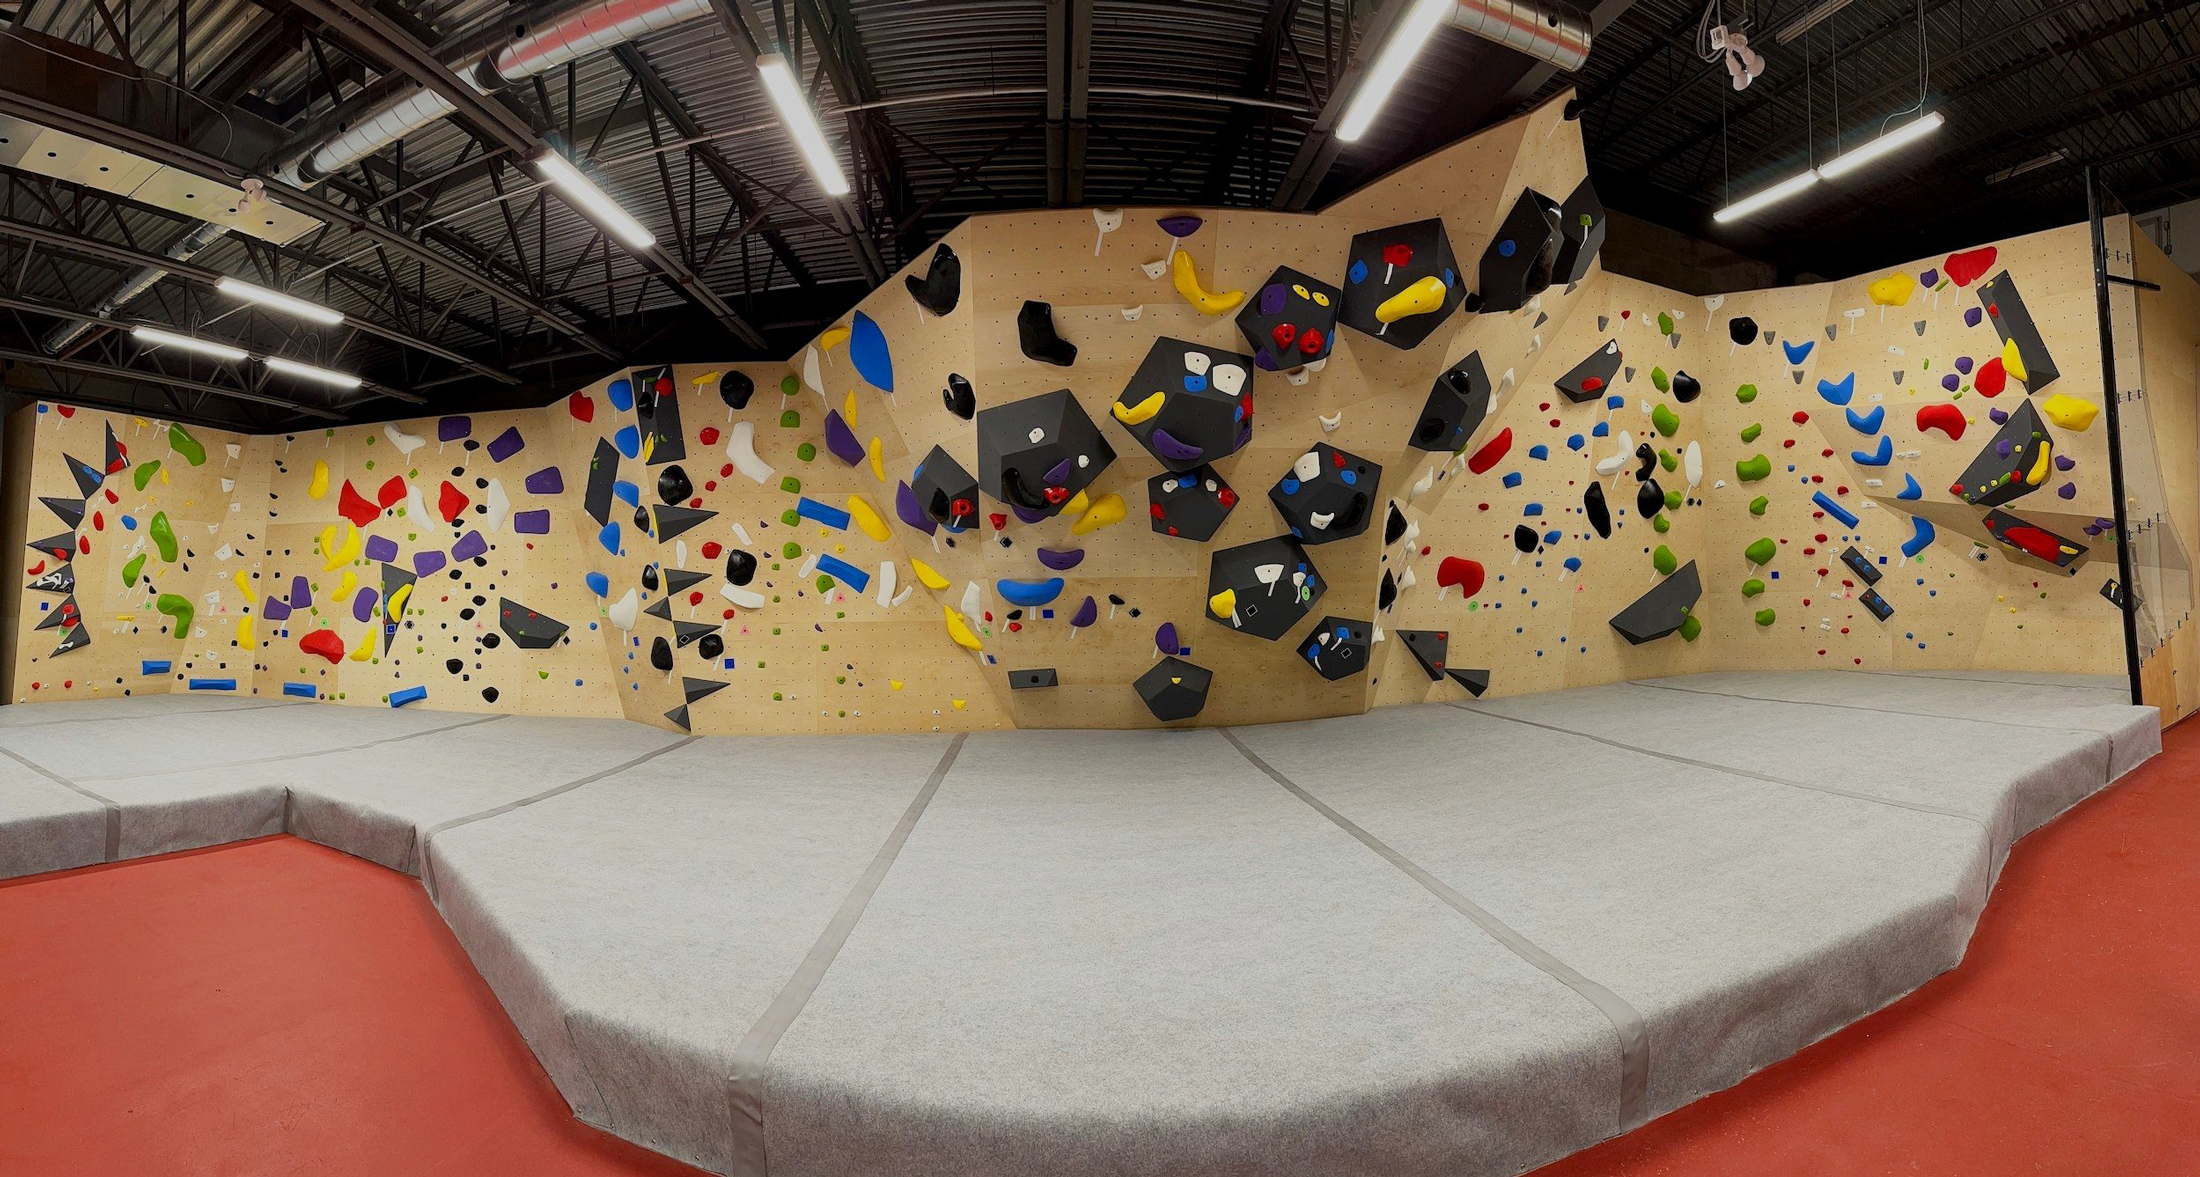 The Cove's bouldering walls